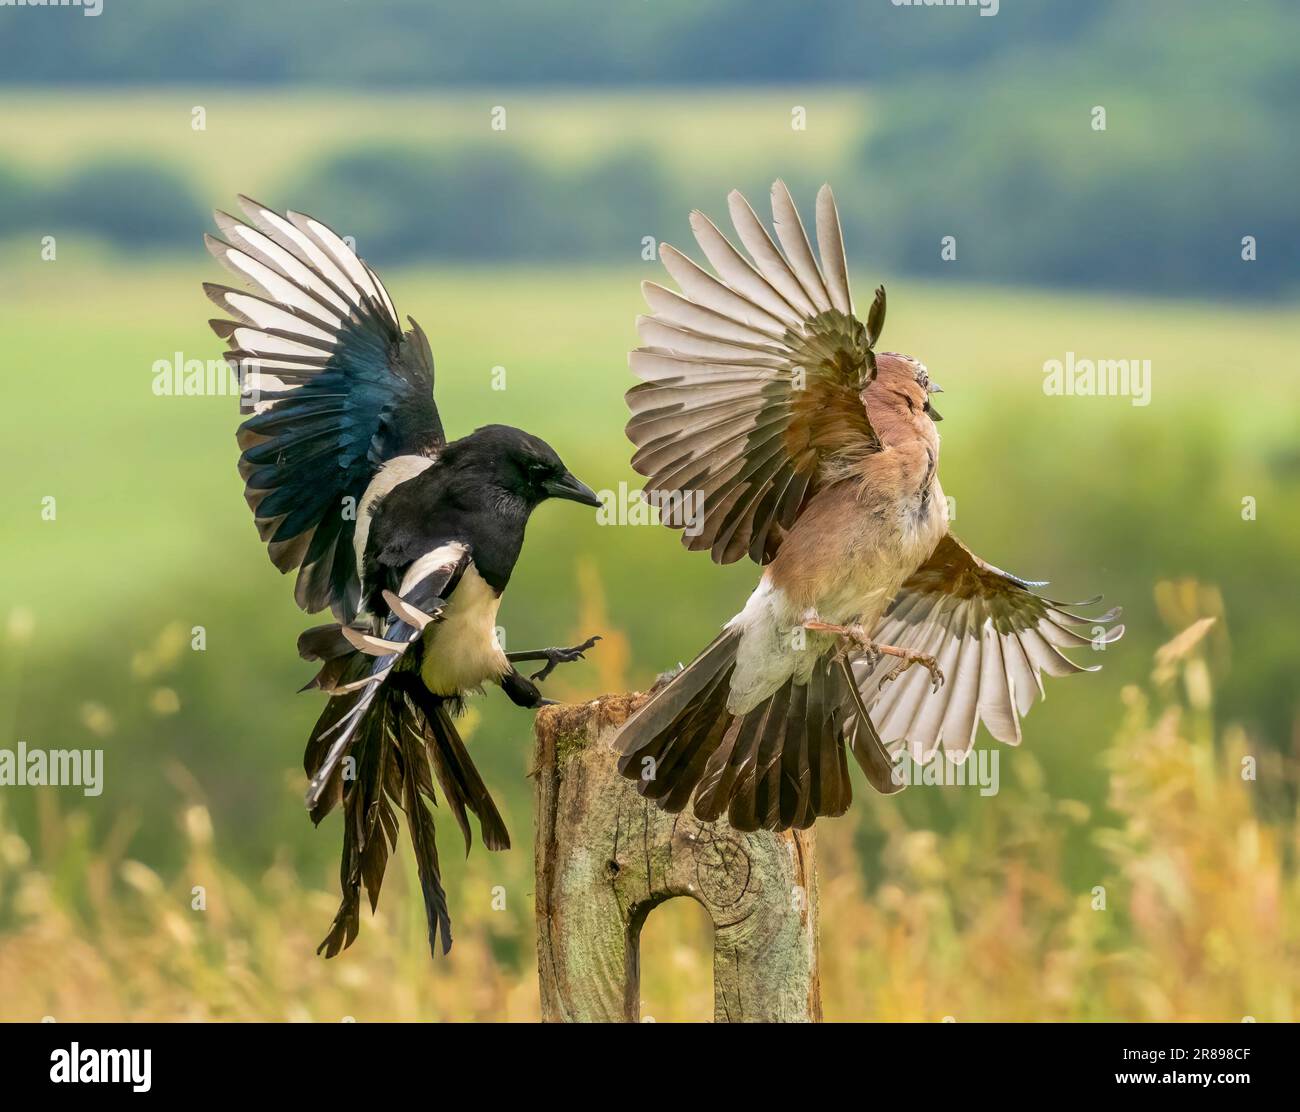 A Magpie, (Pica pica) and a Jay, (Garrulus glandarius), engage in a ferocious looking territorial dispute. Bradford, West Yorkshire, UK Stock Photo